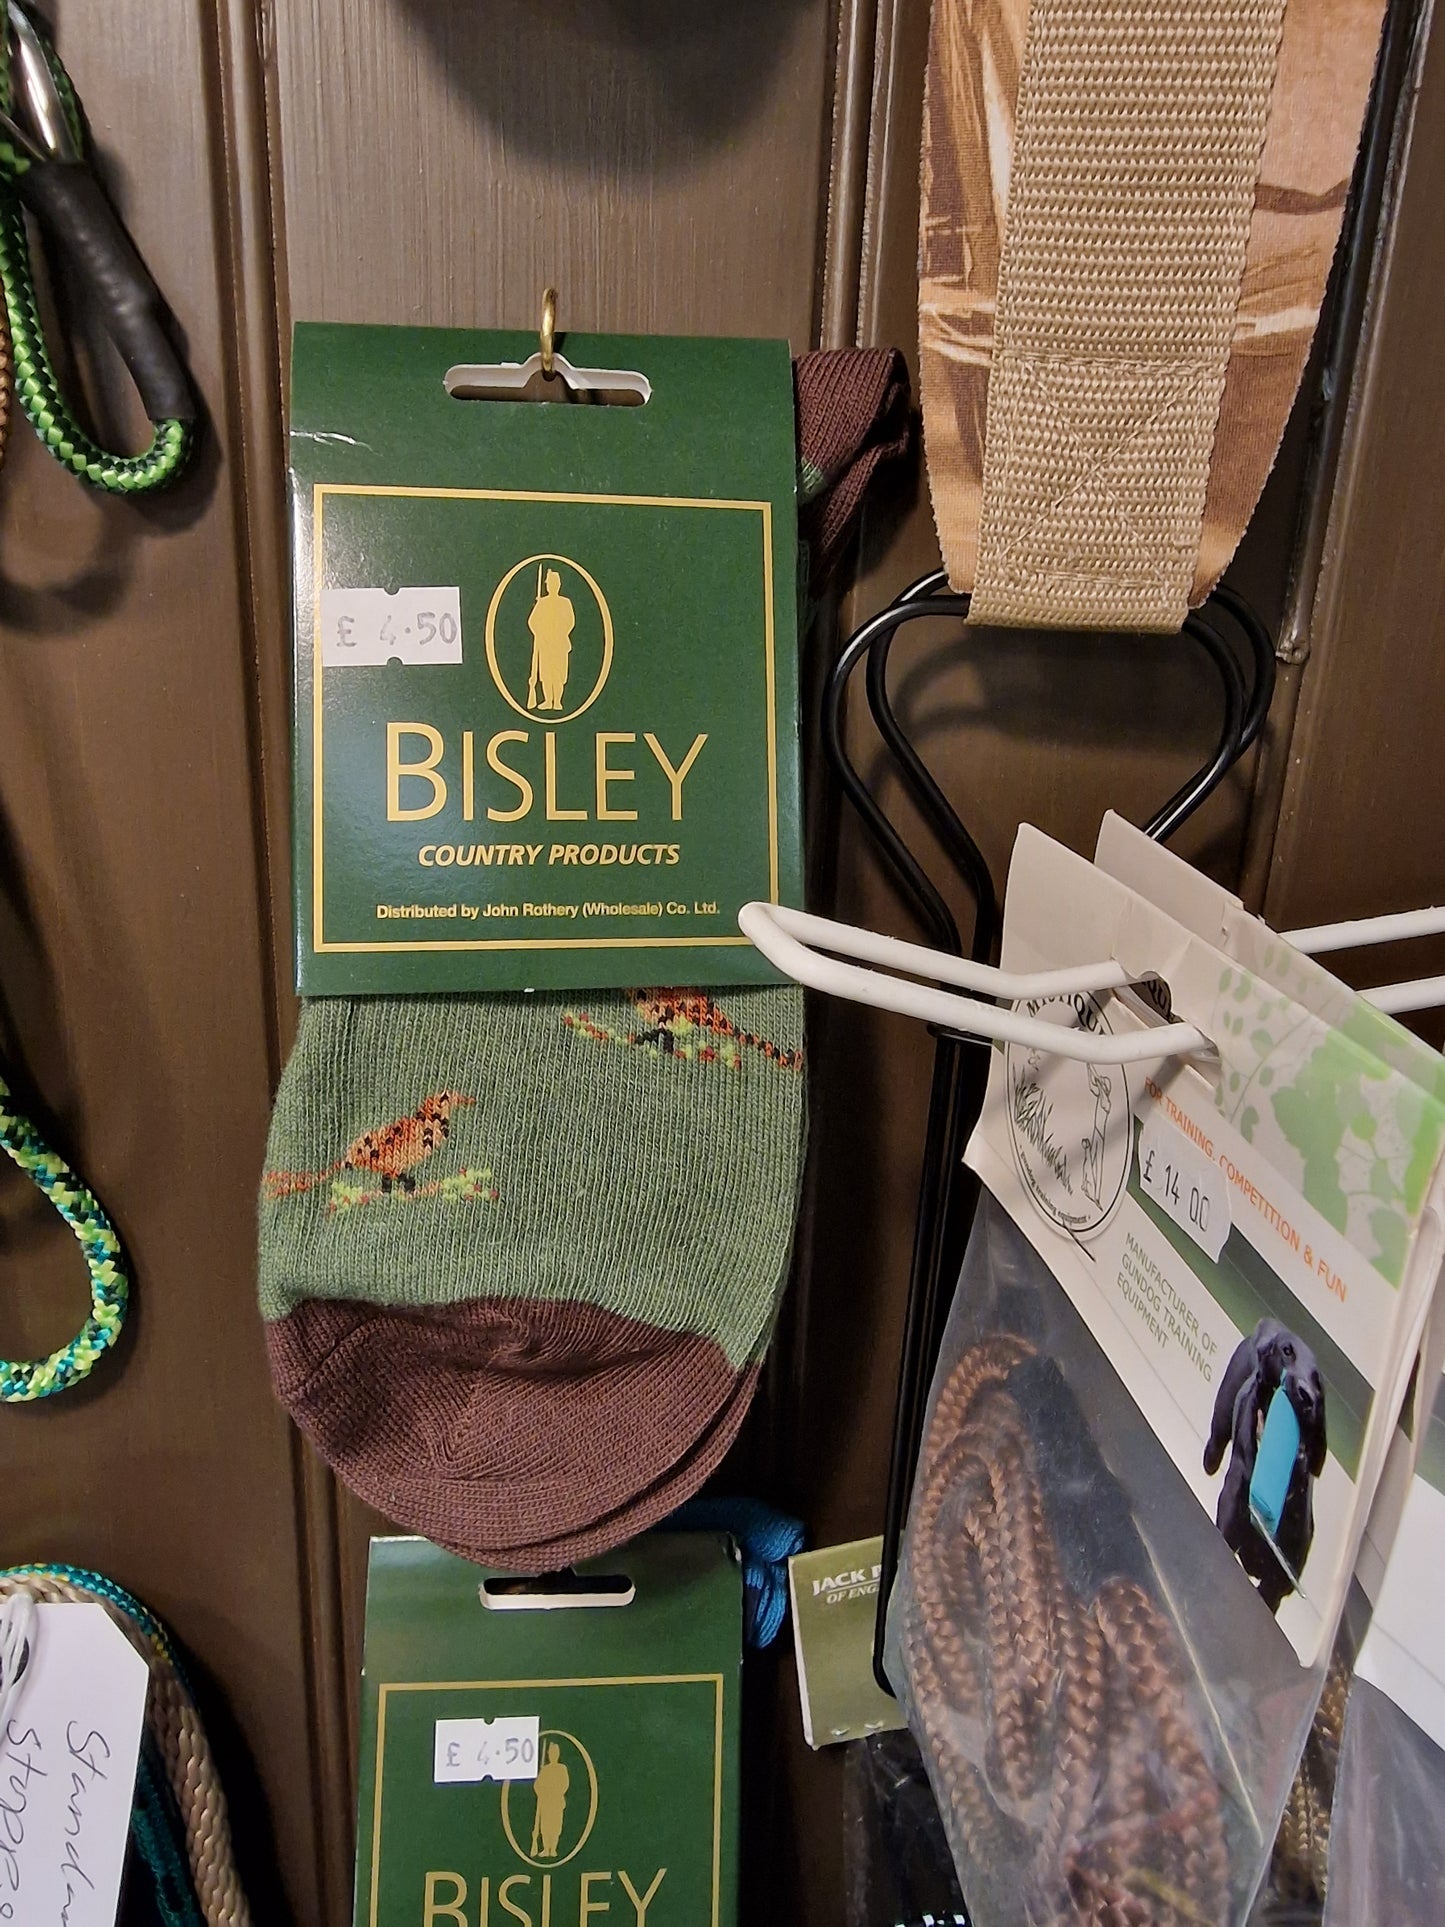 BISLEY Chartacter shooting socks MADE IN THE UK